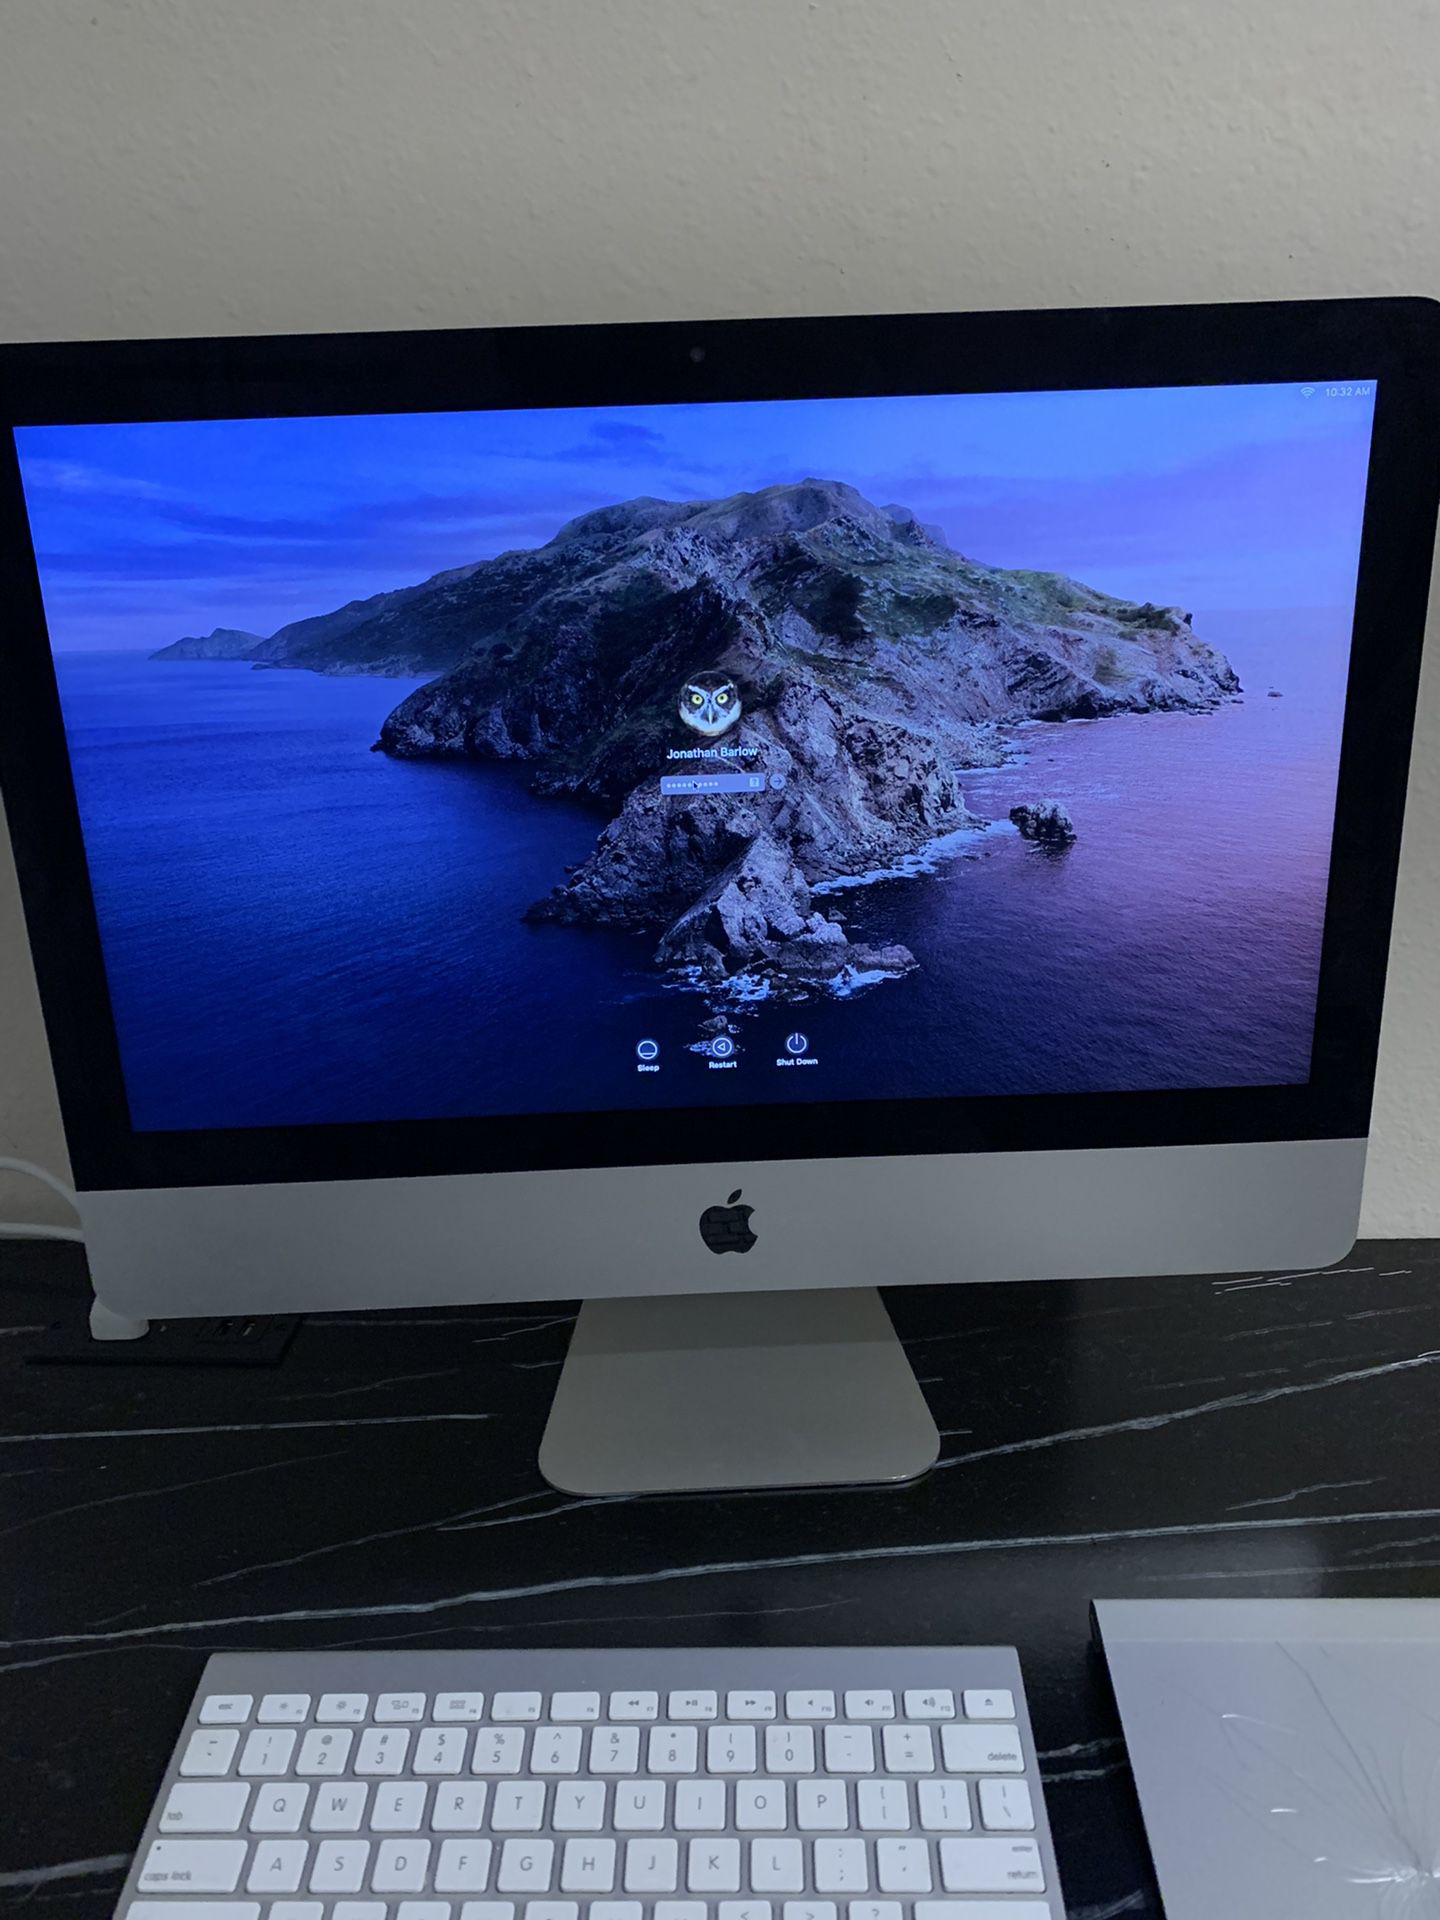 iMac Desktop With Keyboard & Touchscreen Mouse